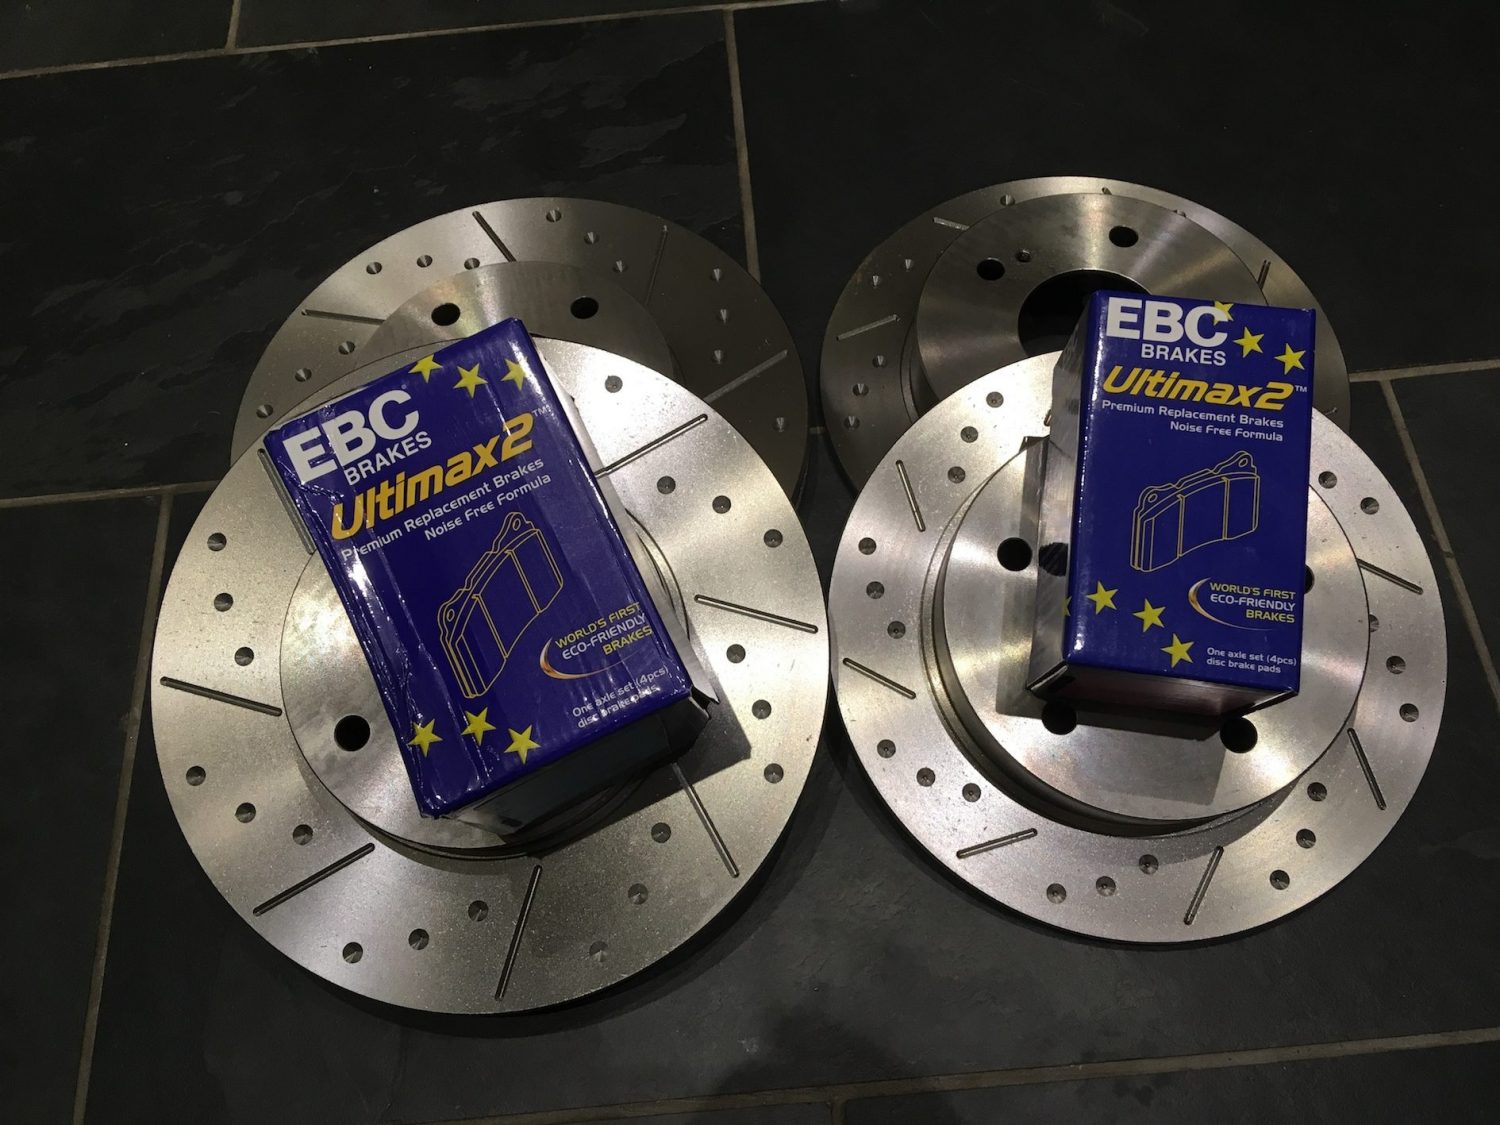 Nissan 200SX S14, S14A, S15 Grooved Brake Discs & EBC UltiMAX Pads, Fnt + Rear